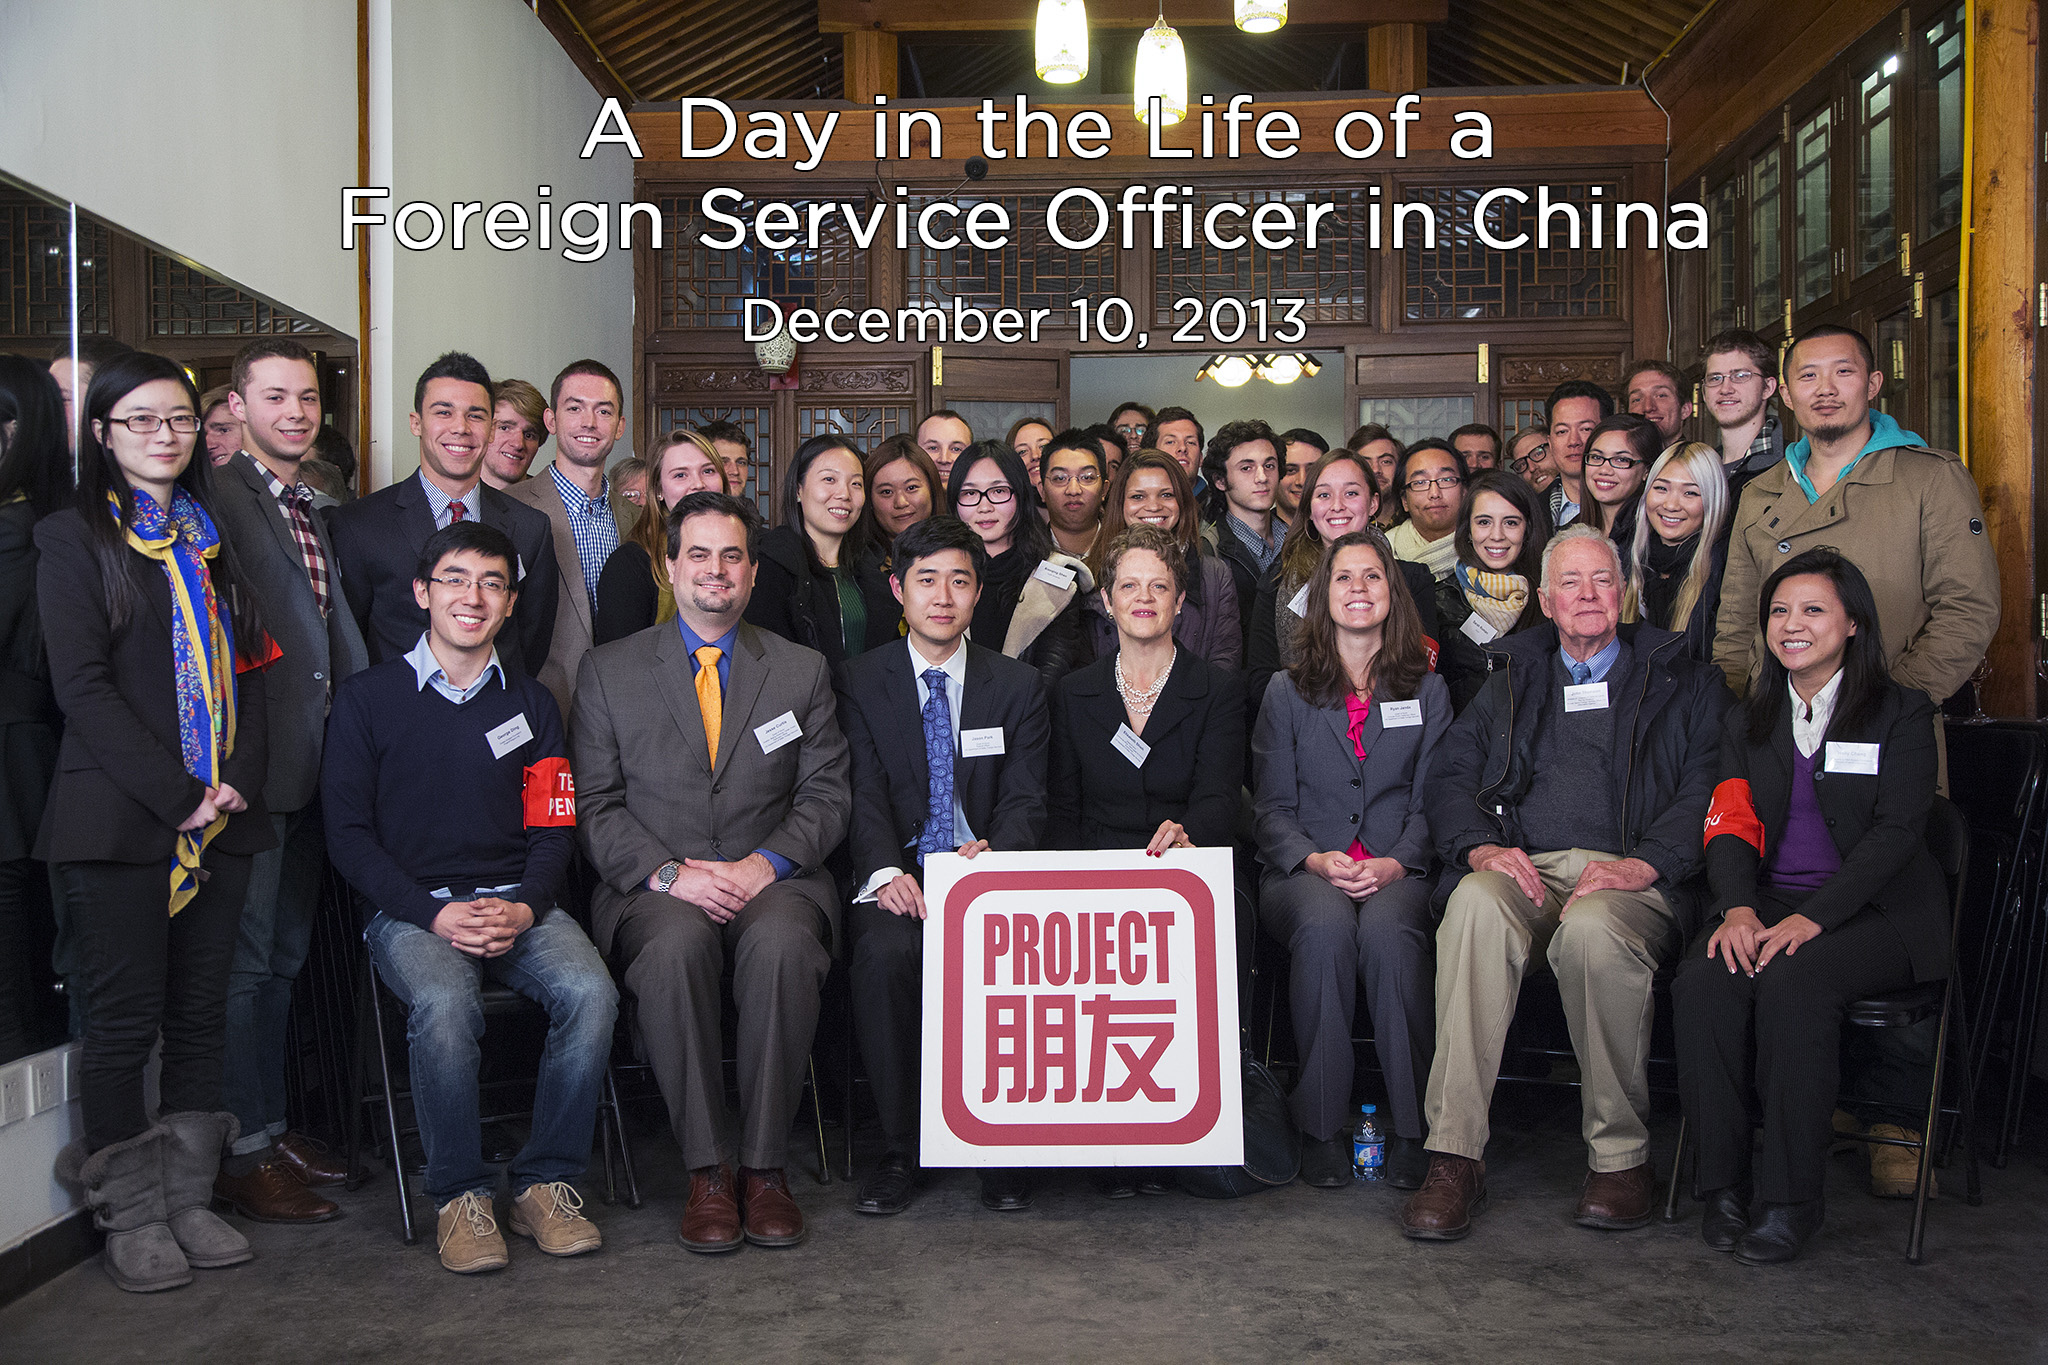 A Day in the Life of a Foreign Service Officer in China